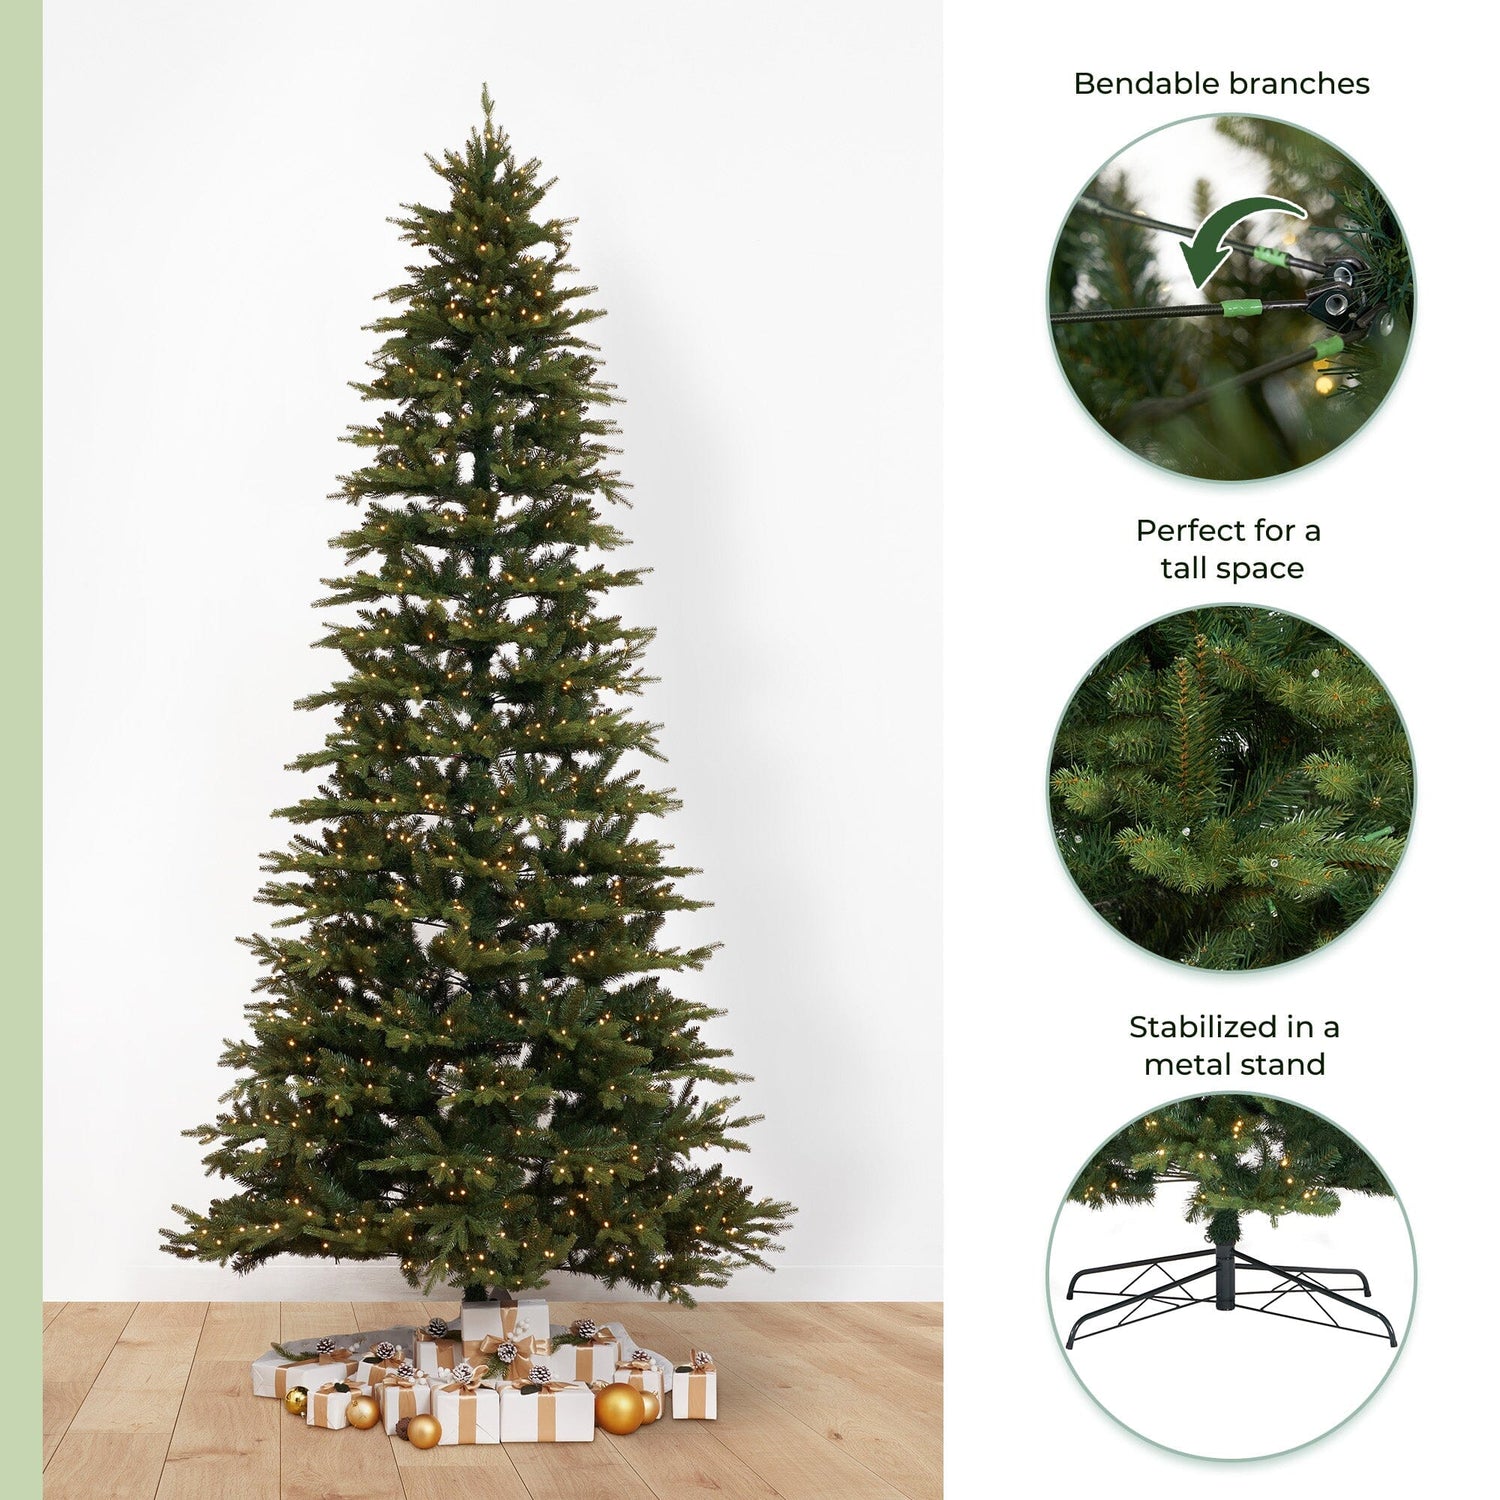 11’ Belgium Fir “Natural Look” Artificial Christmas Tree with 1250 Clear LED Lights and 4222 Bendable Branches